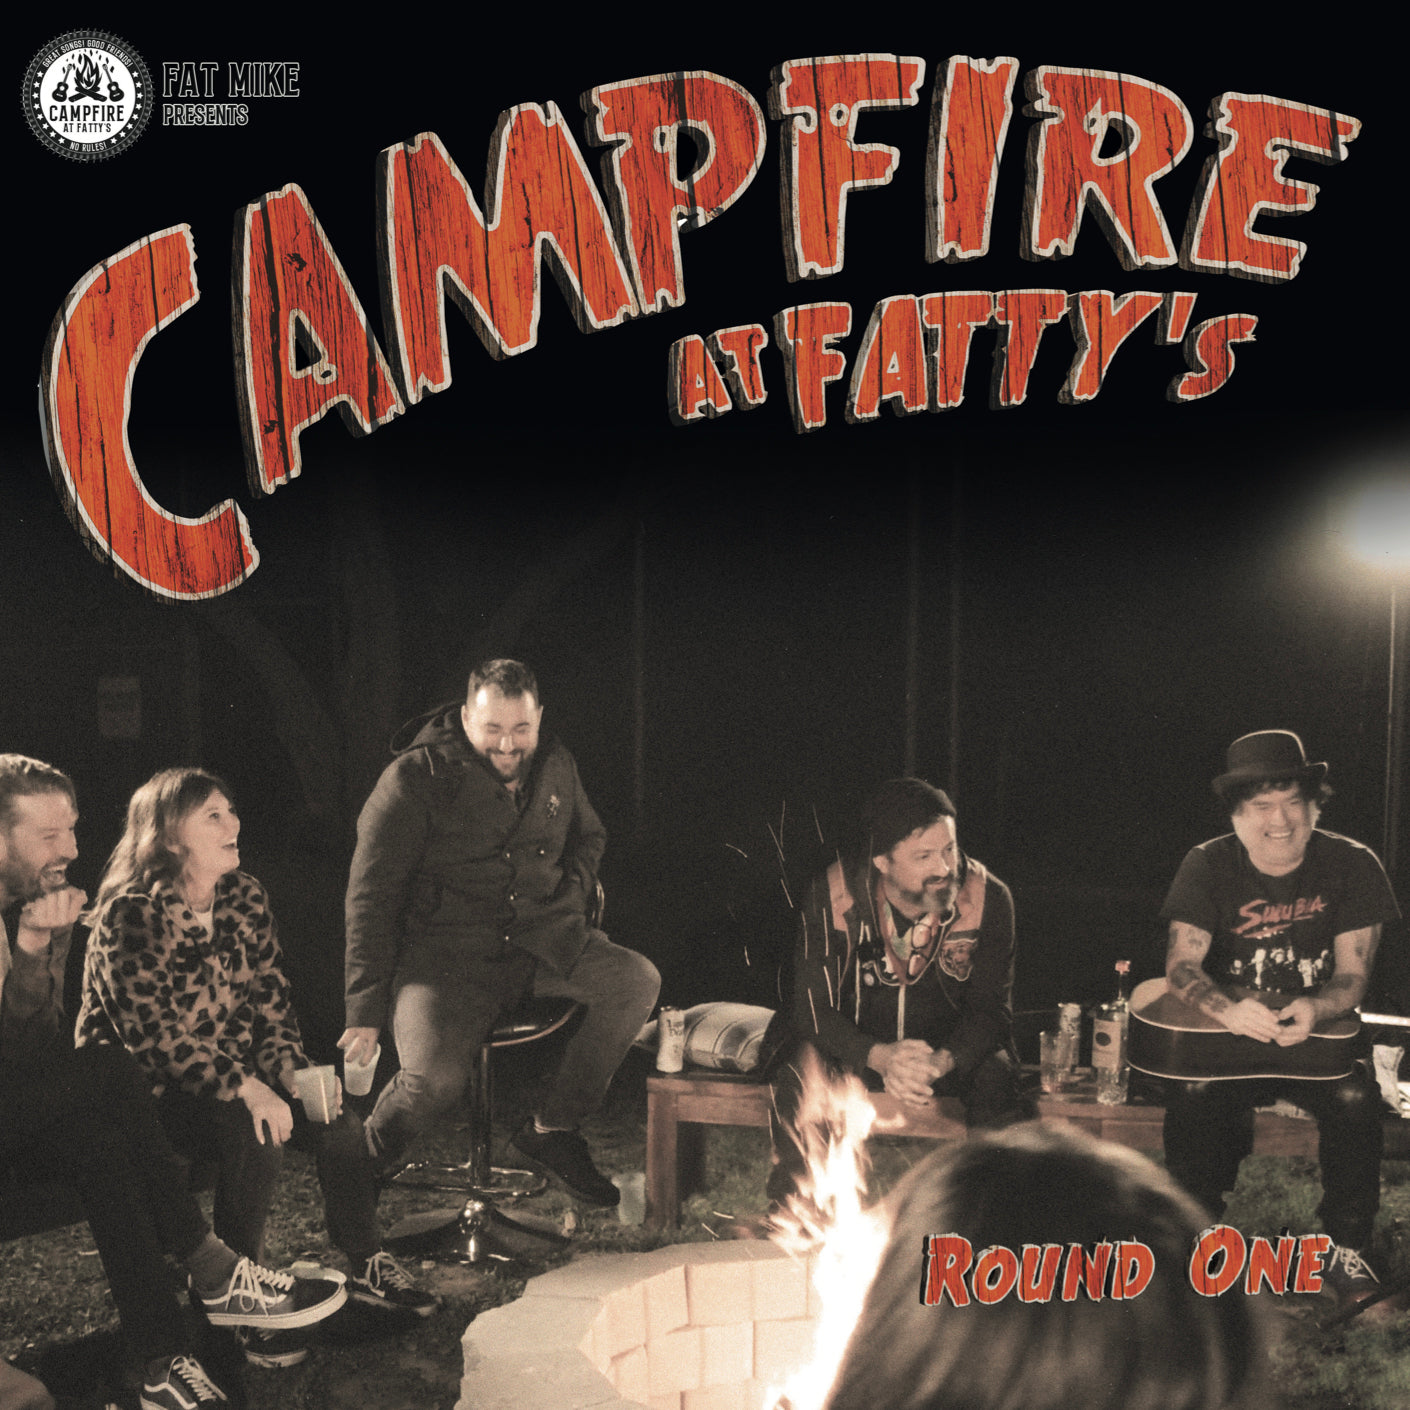 Fat Mike presents: Campfire at Fatty‘s Round One